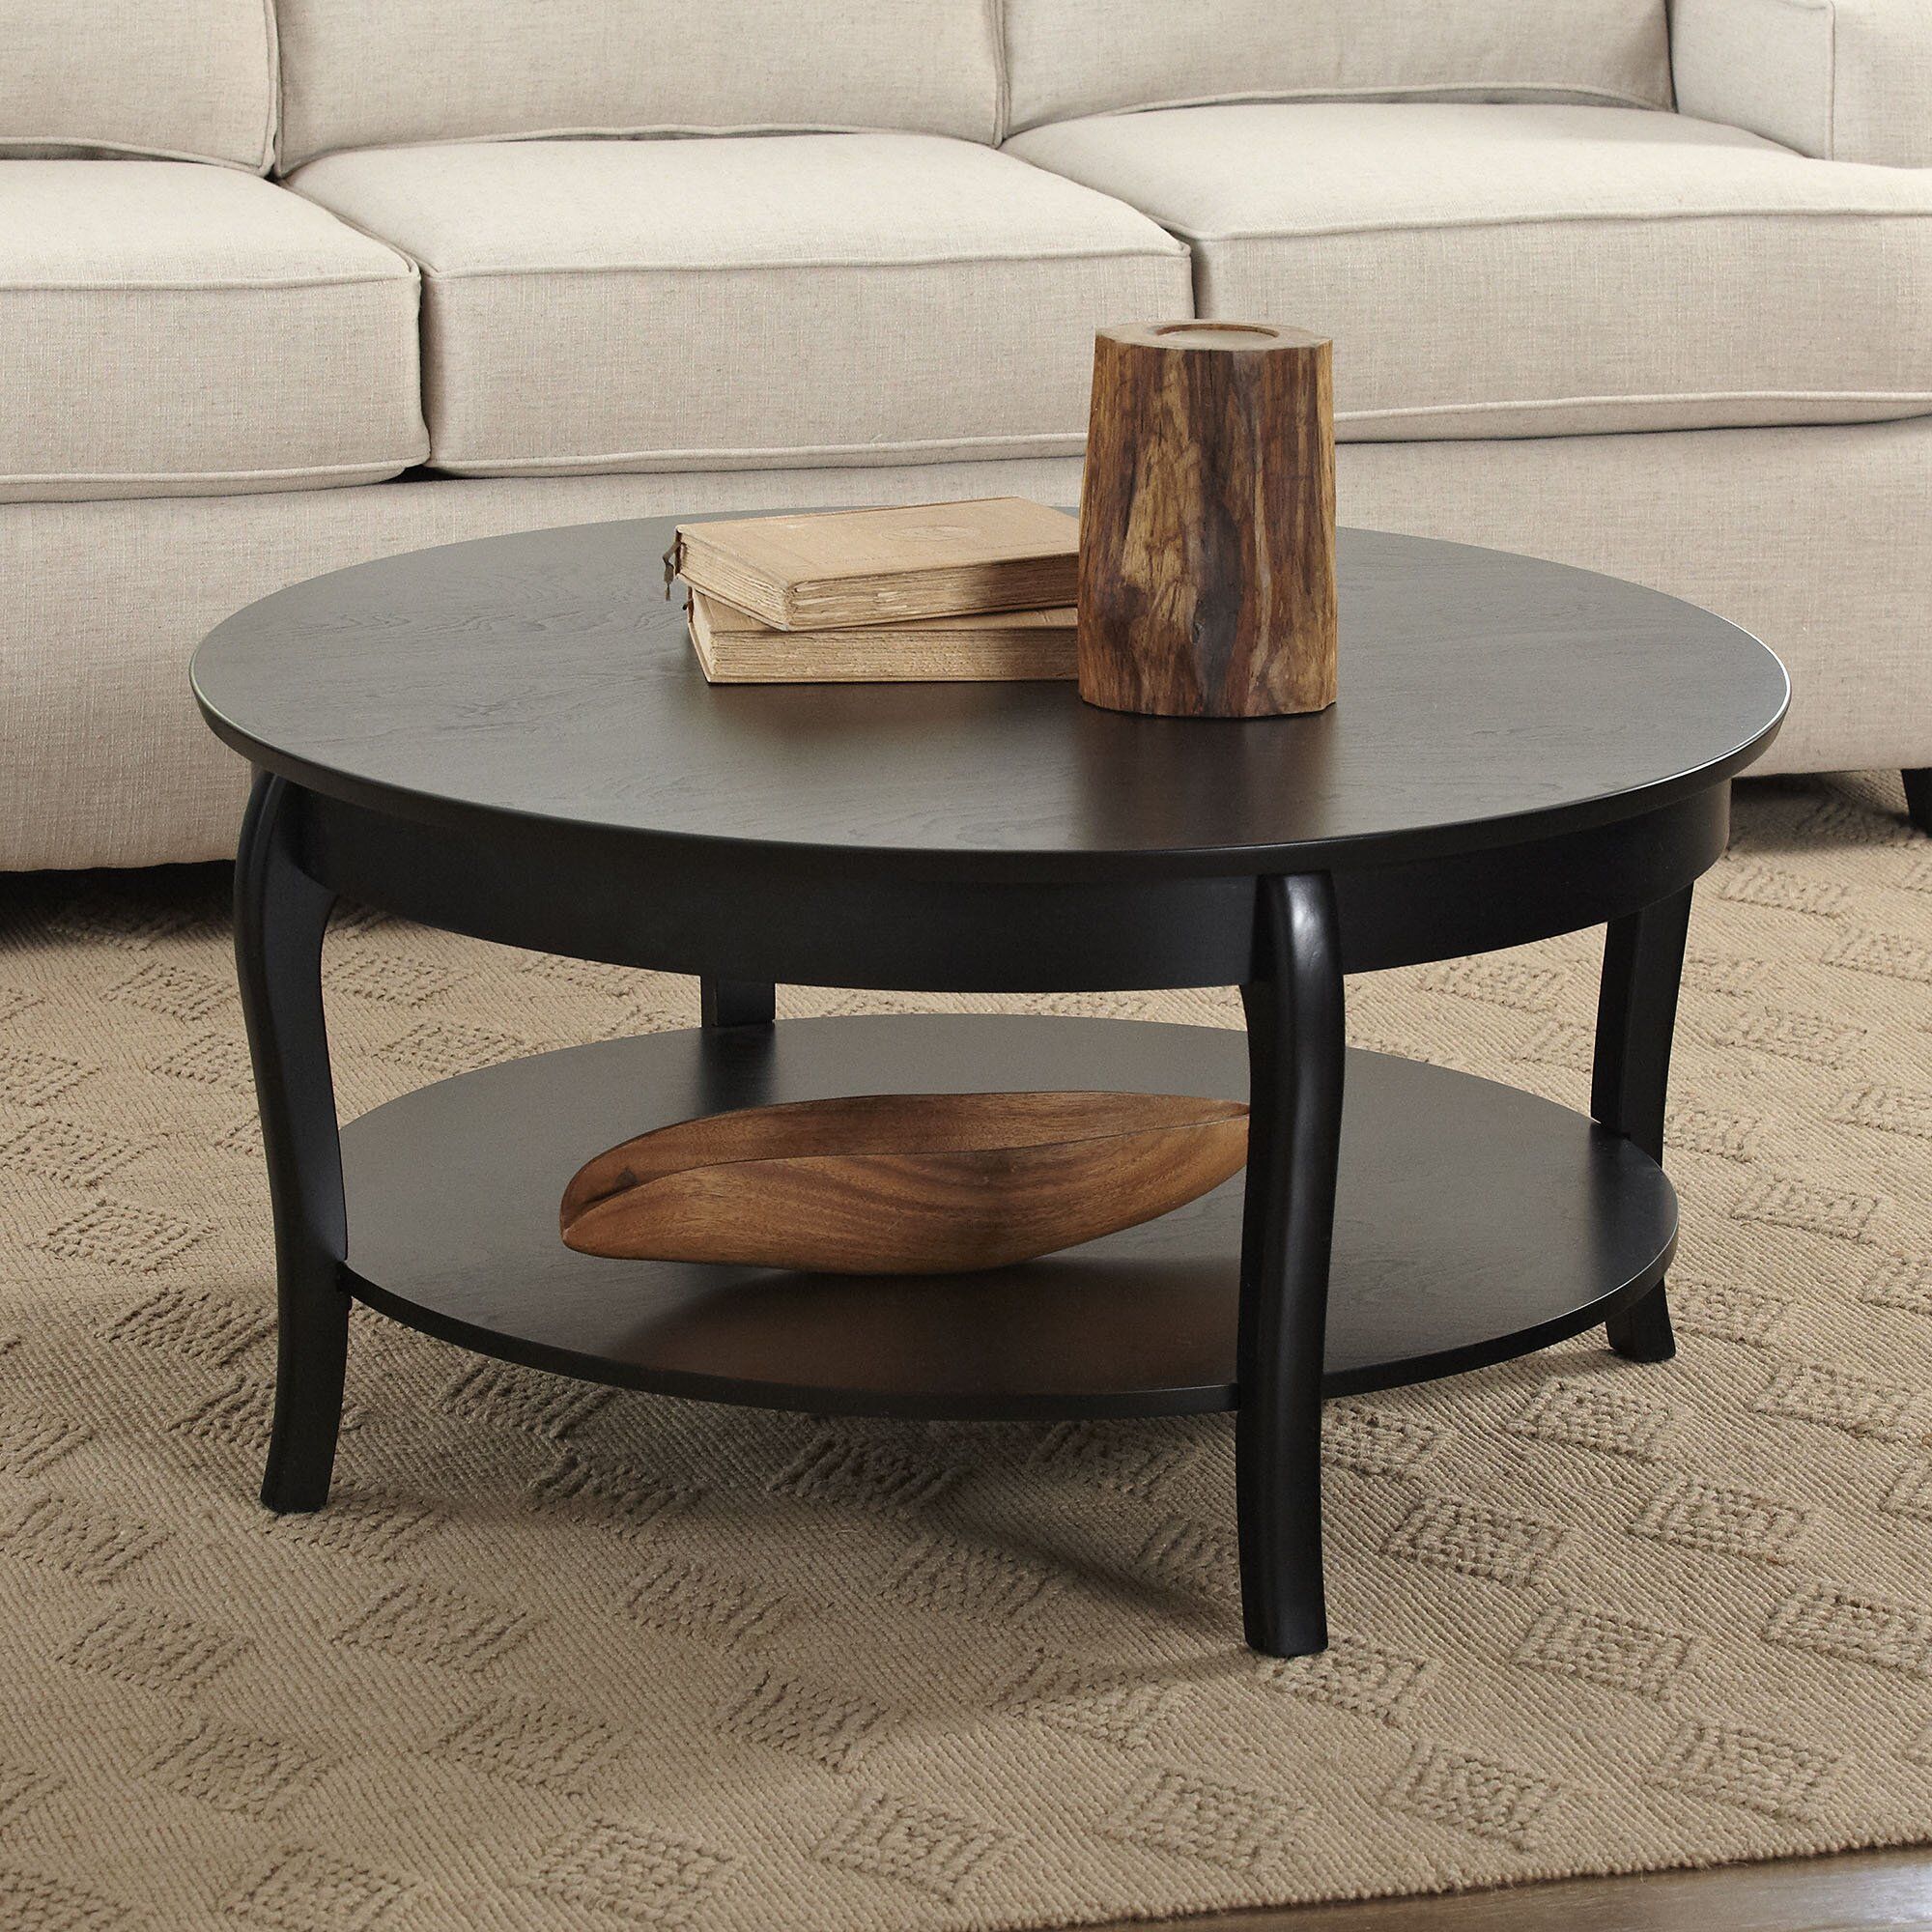 Birch Lane Alberts Round Coffee Table & Reviews | Wayfair Inside Round Coffee Tables (View 10 of 20)